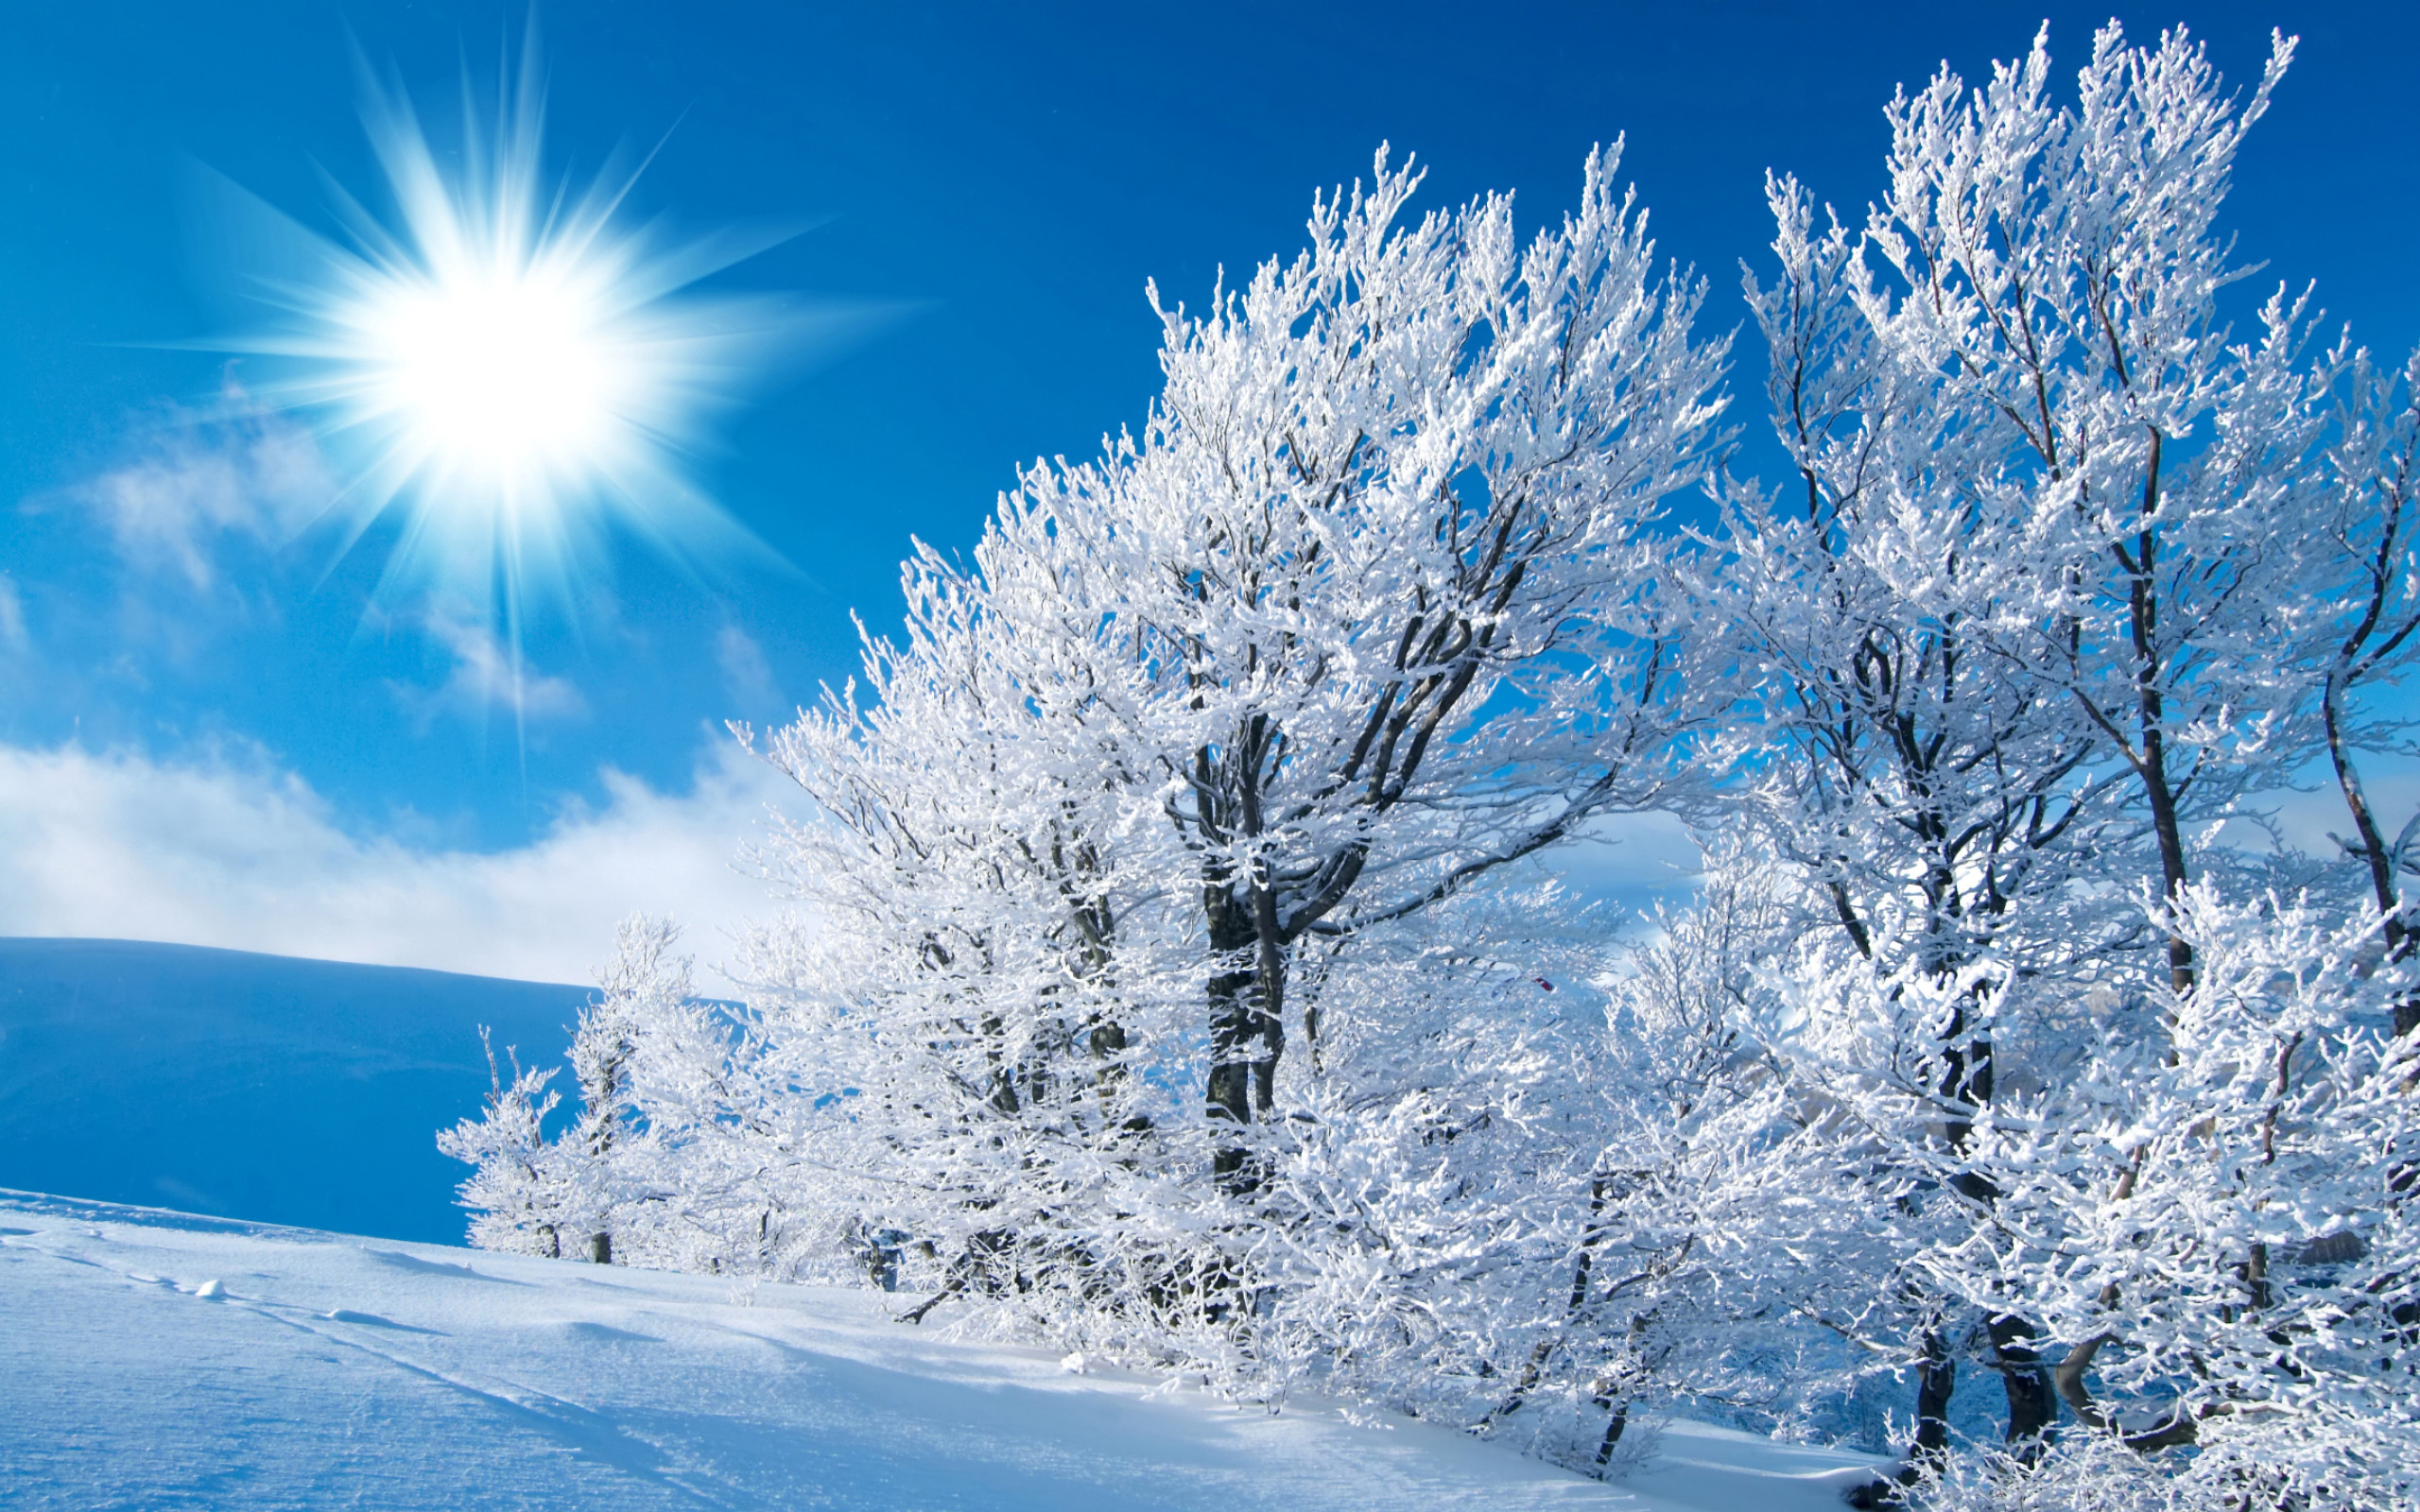 0 Winter Backgrounds HD Group Winter Backgrounds Scenes Group